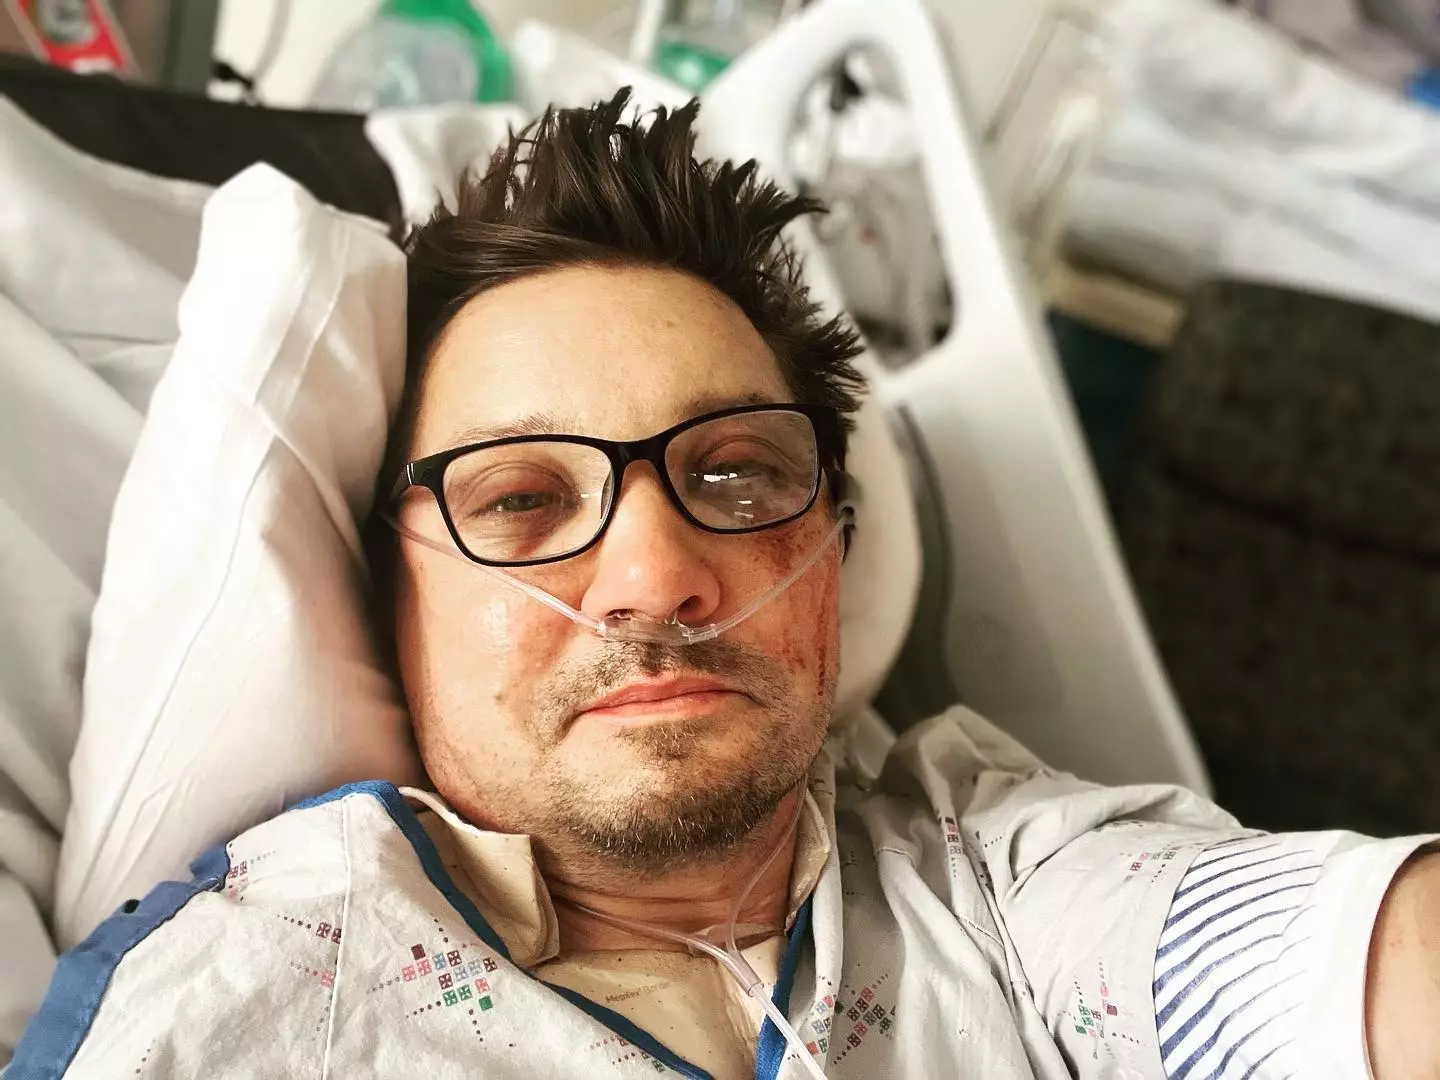 Jeremy Renner looked almost unrecognisable after the accident.